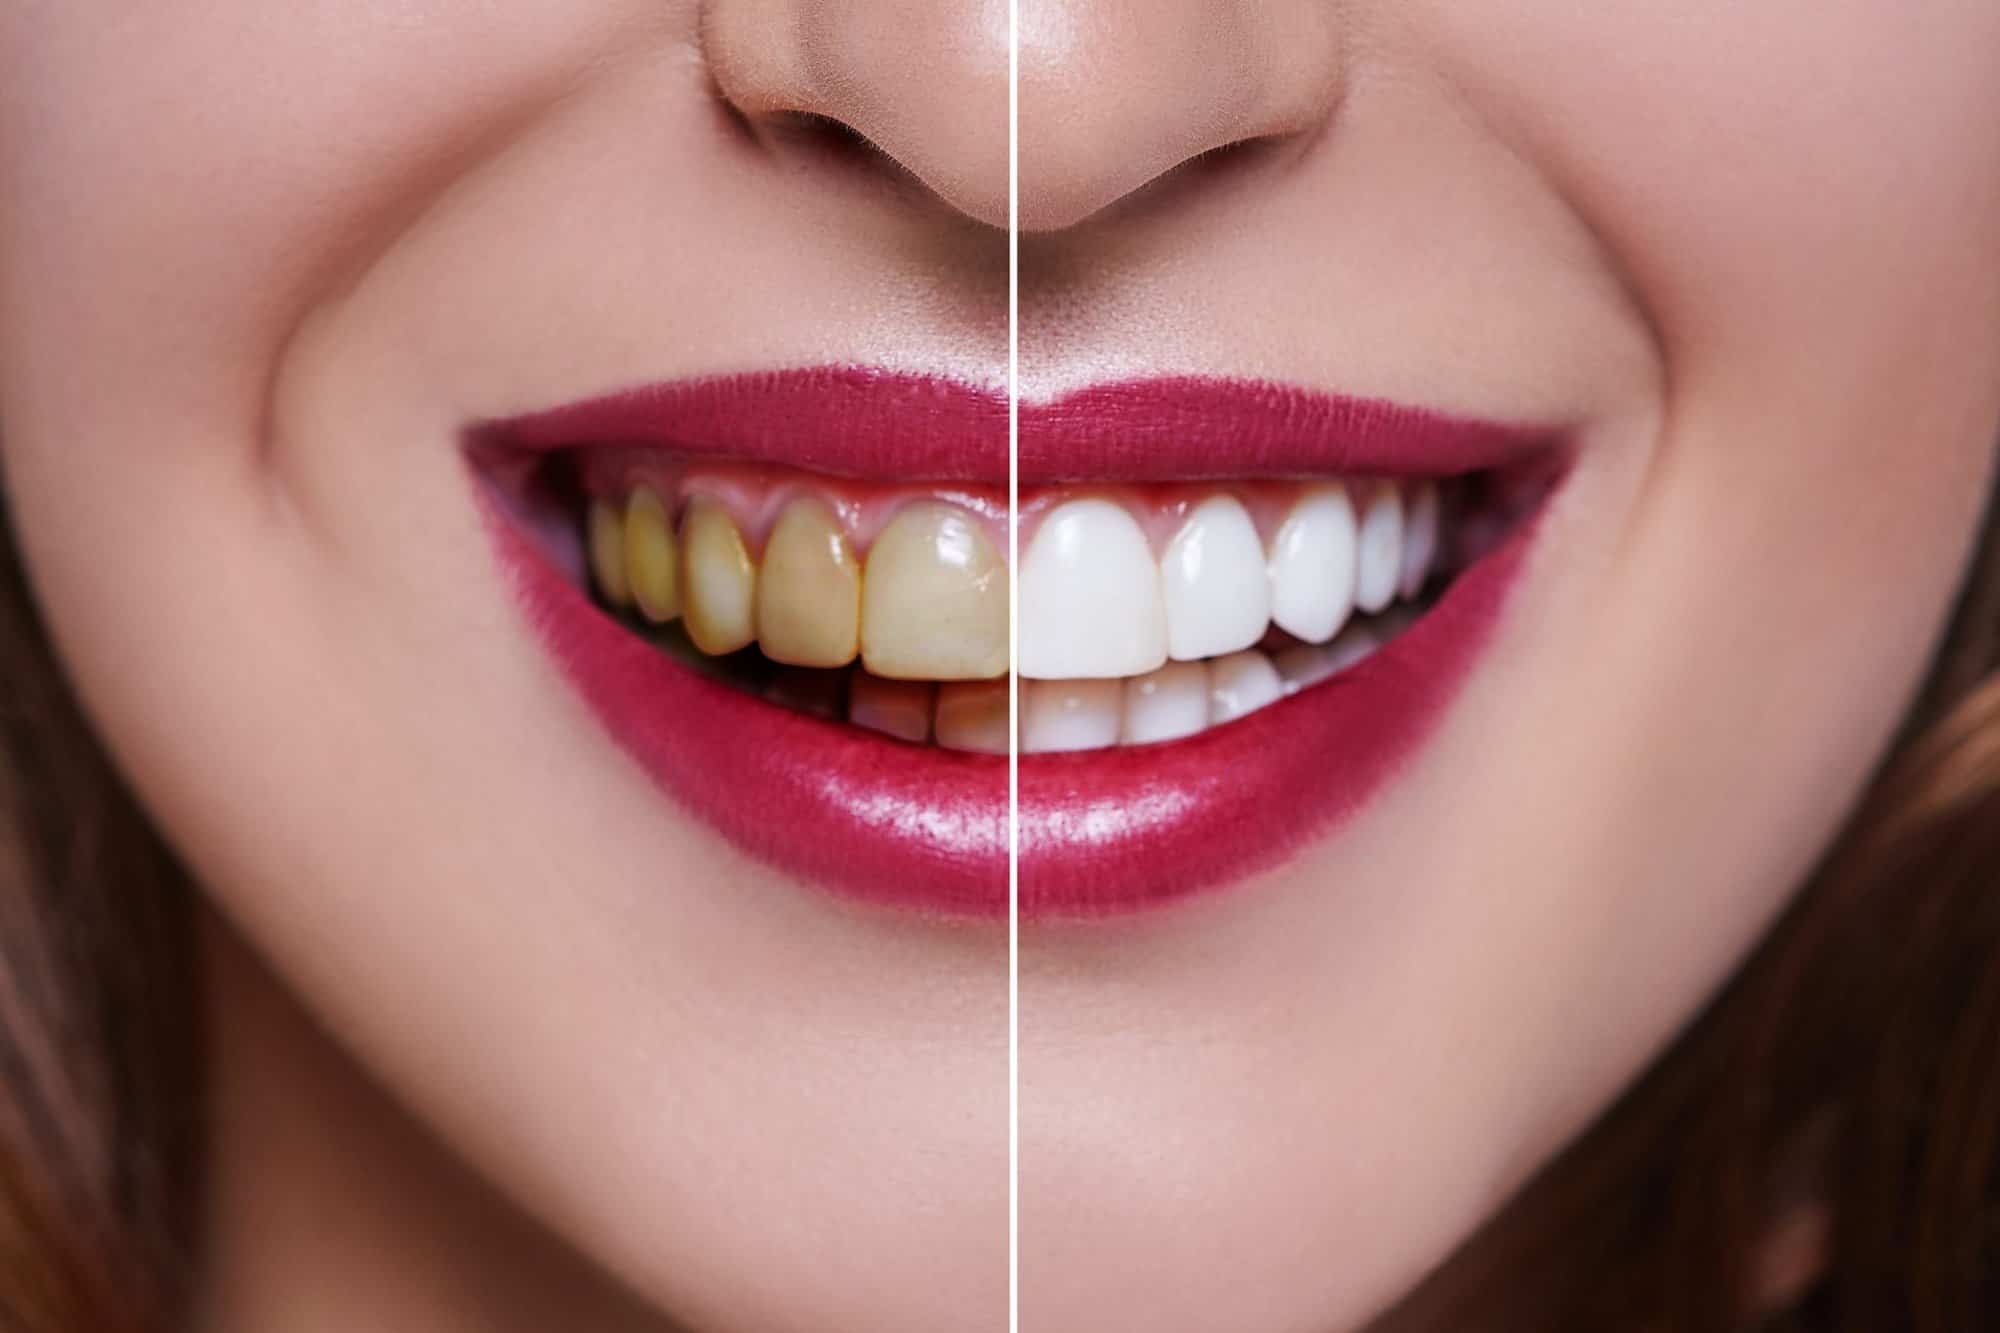 How Long Does Professional Teeth Whitening Last?